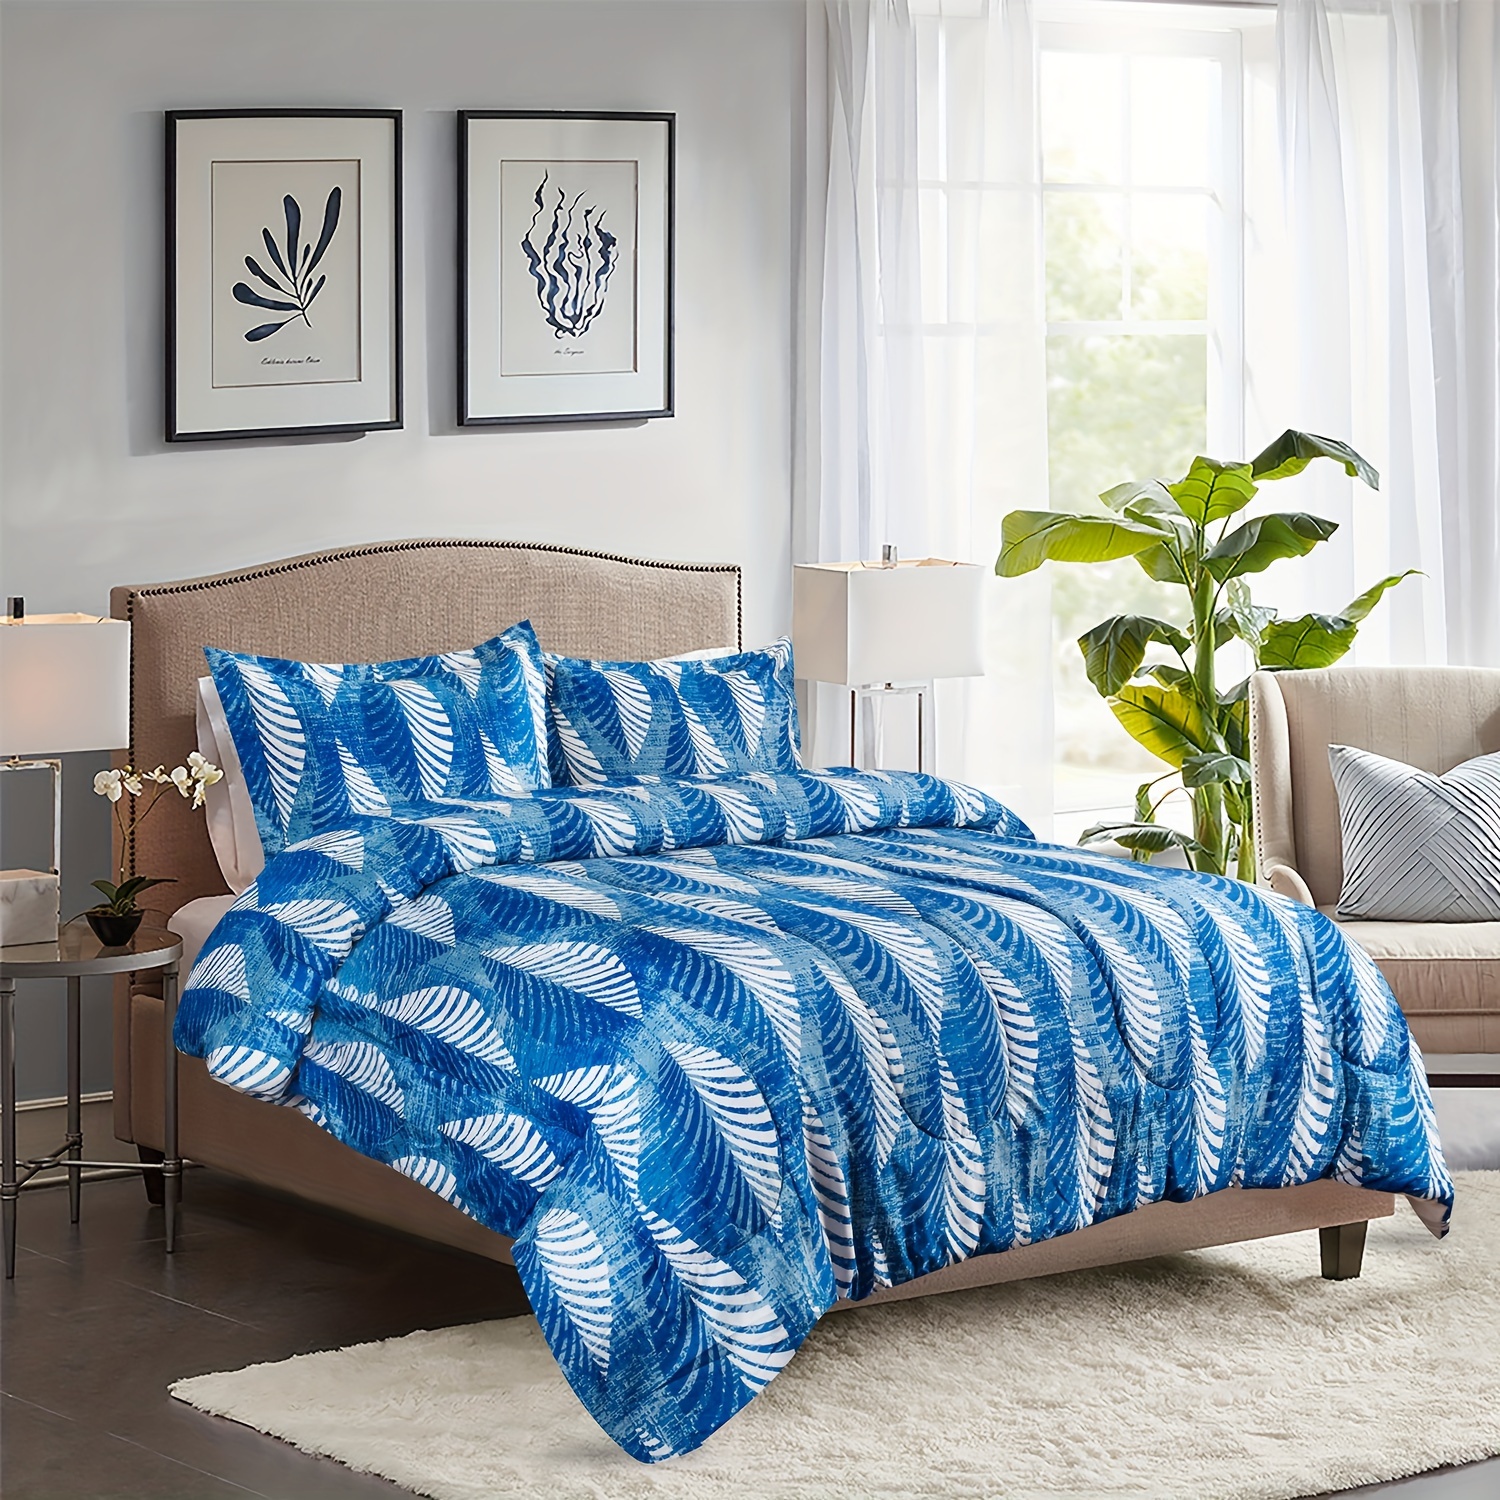 

3pcs Print Comforter Set, Soft, Skin-friendly Bedding For Bedroom Or Guest Room, Includes 1 Comforter And 2 Pillowcases (no Core Needed)